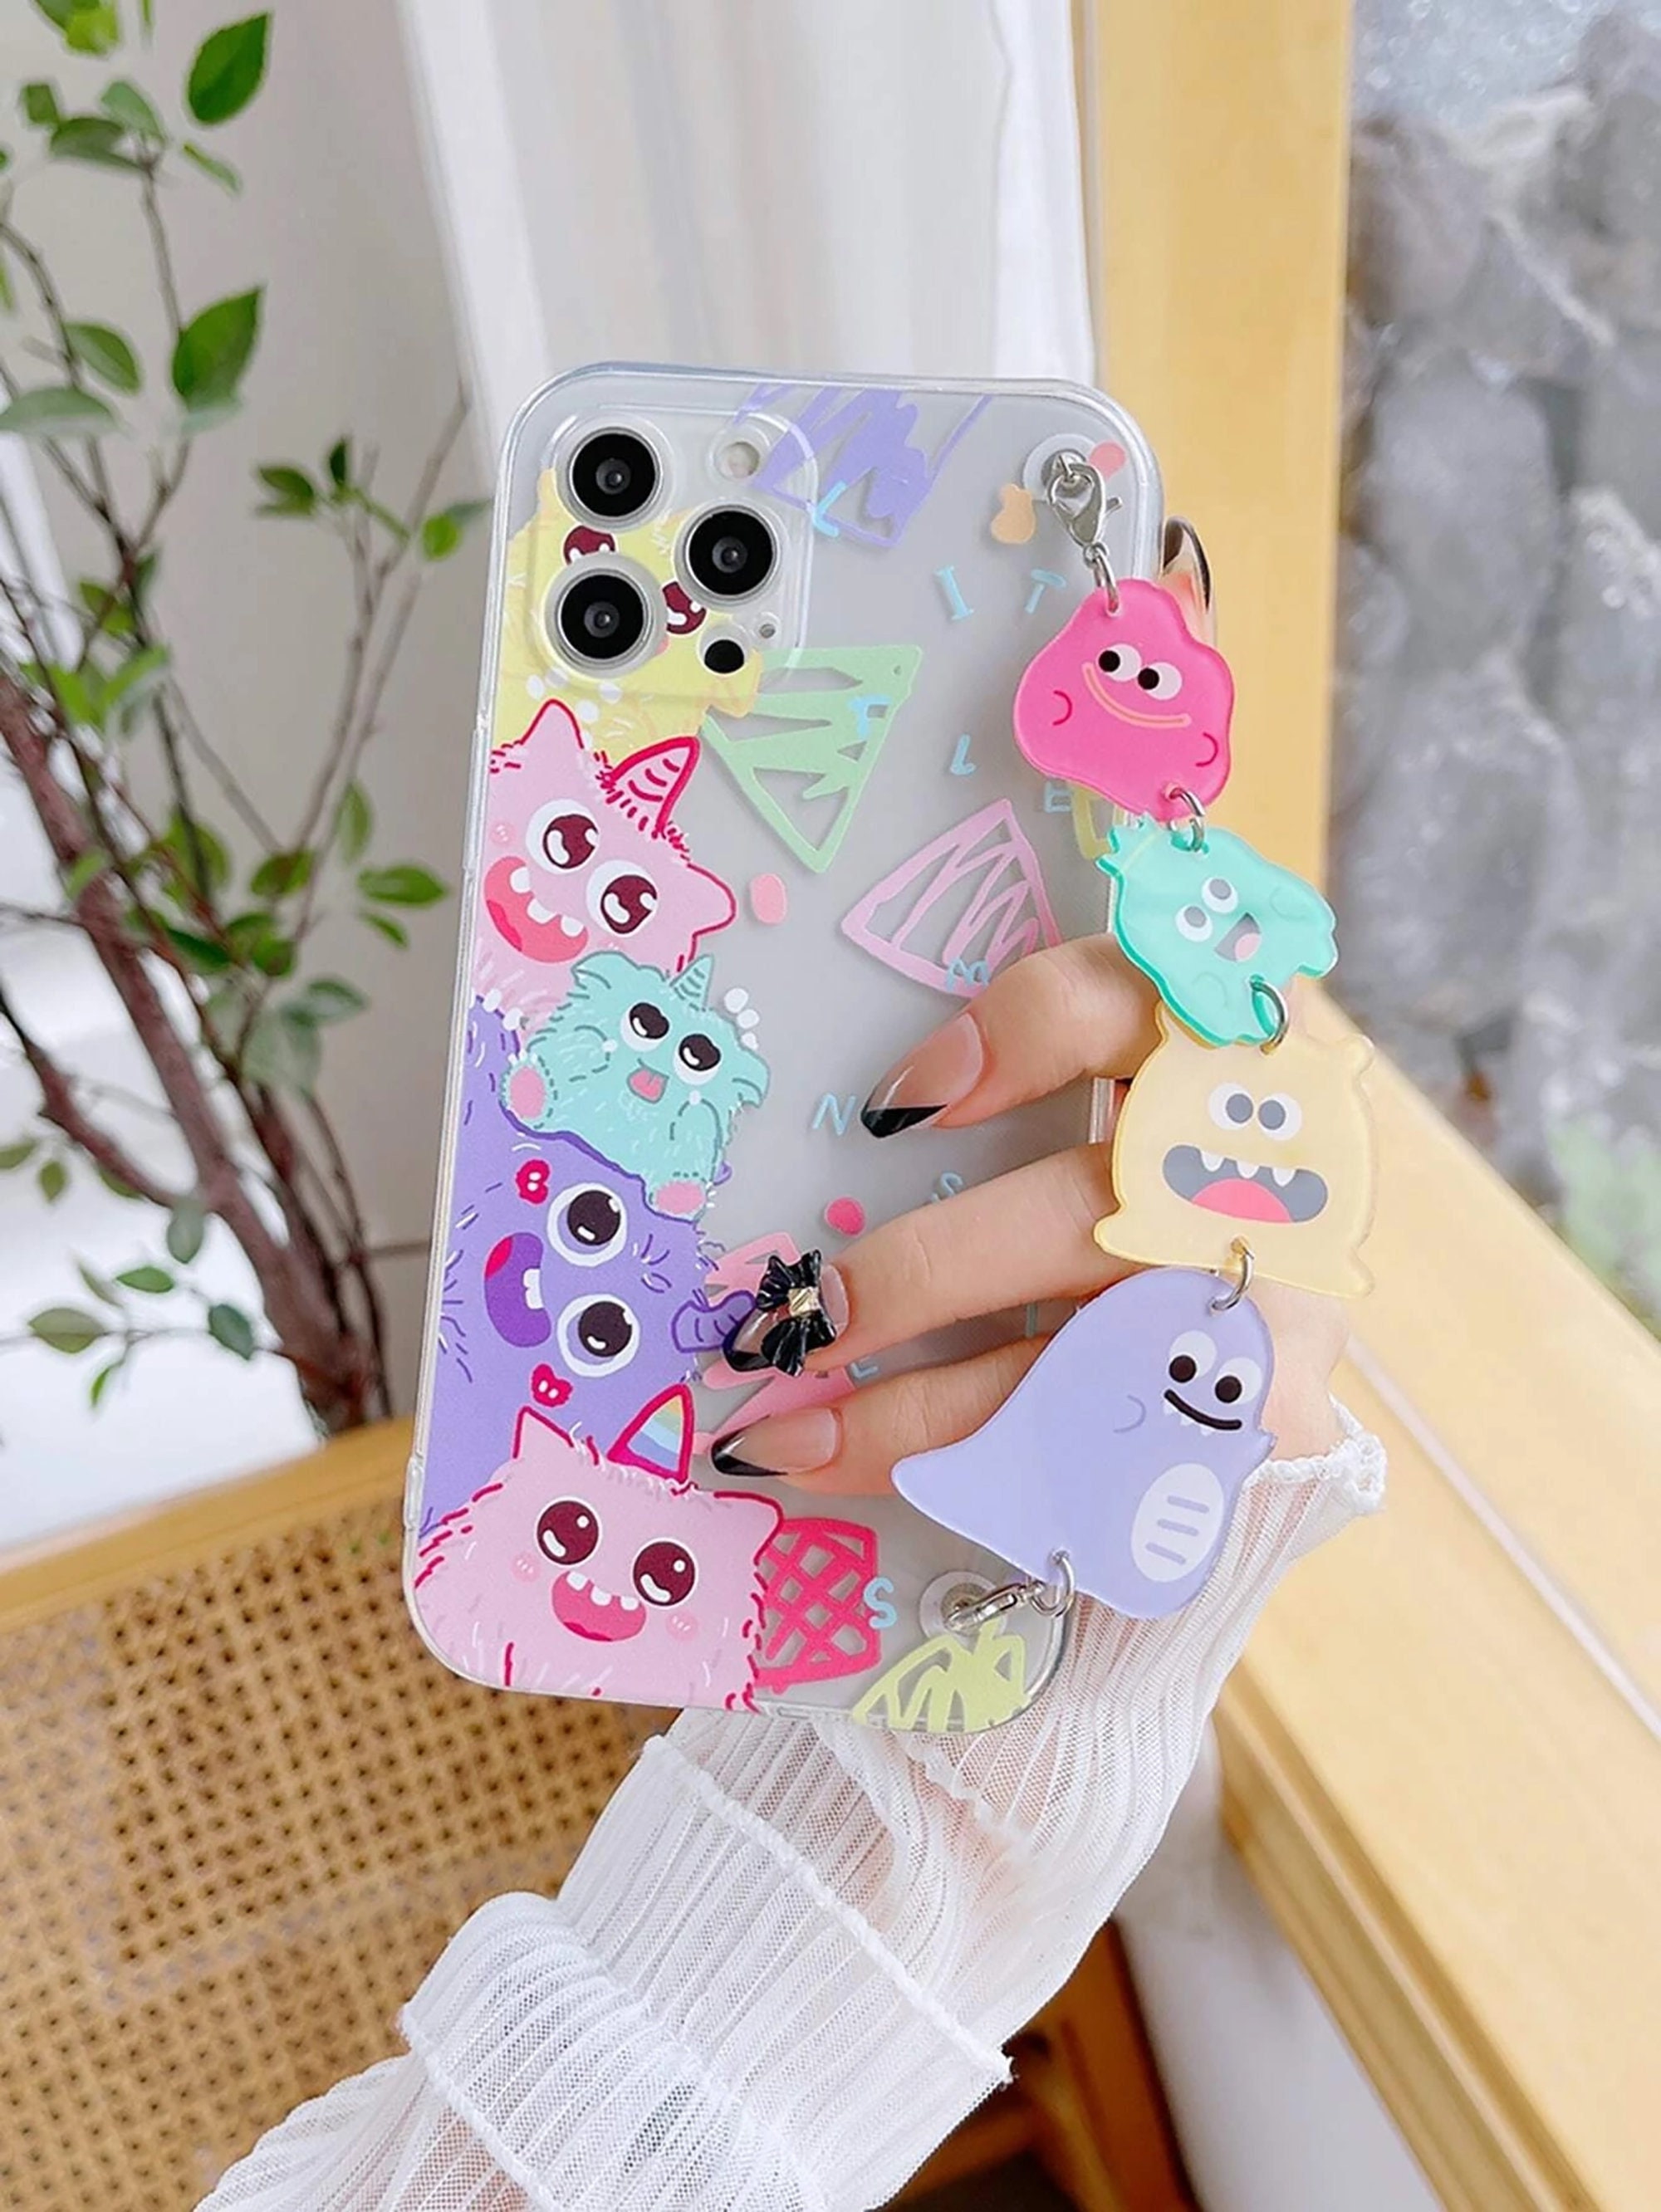  Phone Case Monster's Inc Boo's Door Design Compatible with iPhone  14 13 12 11 X Xs Xr 8 7 6 6s Pro Max Plus Mini Galaxy Note S9 S10 S20 Ultra